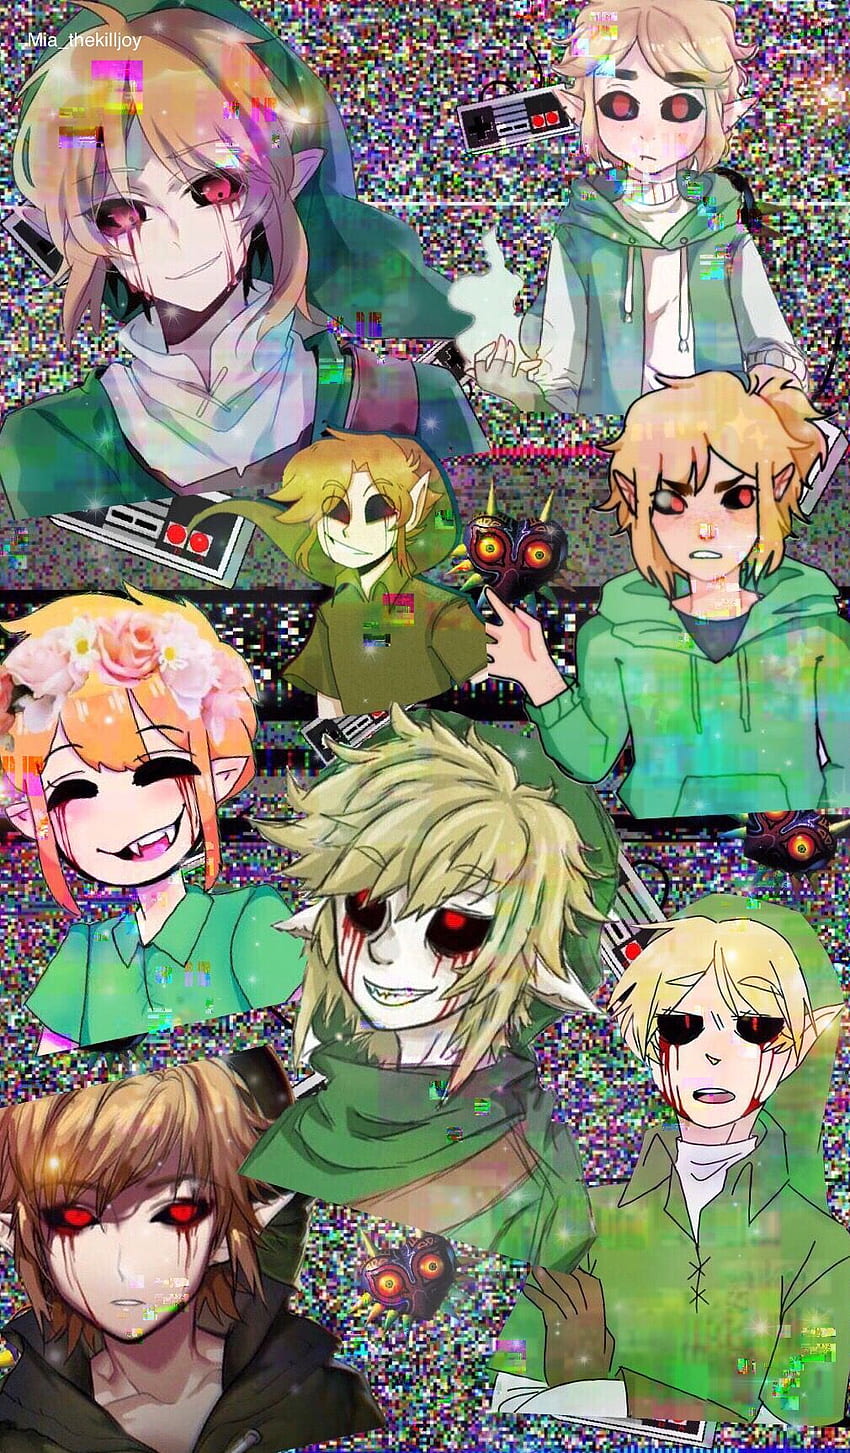 Ben Drowned Wallpapers  Top Free Ben Drowned Backgrounds  WallpaperAccess